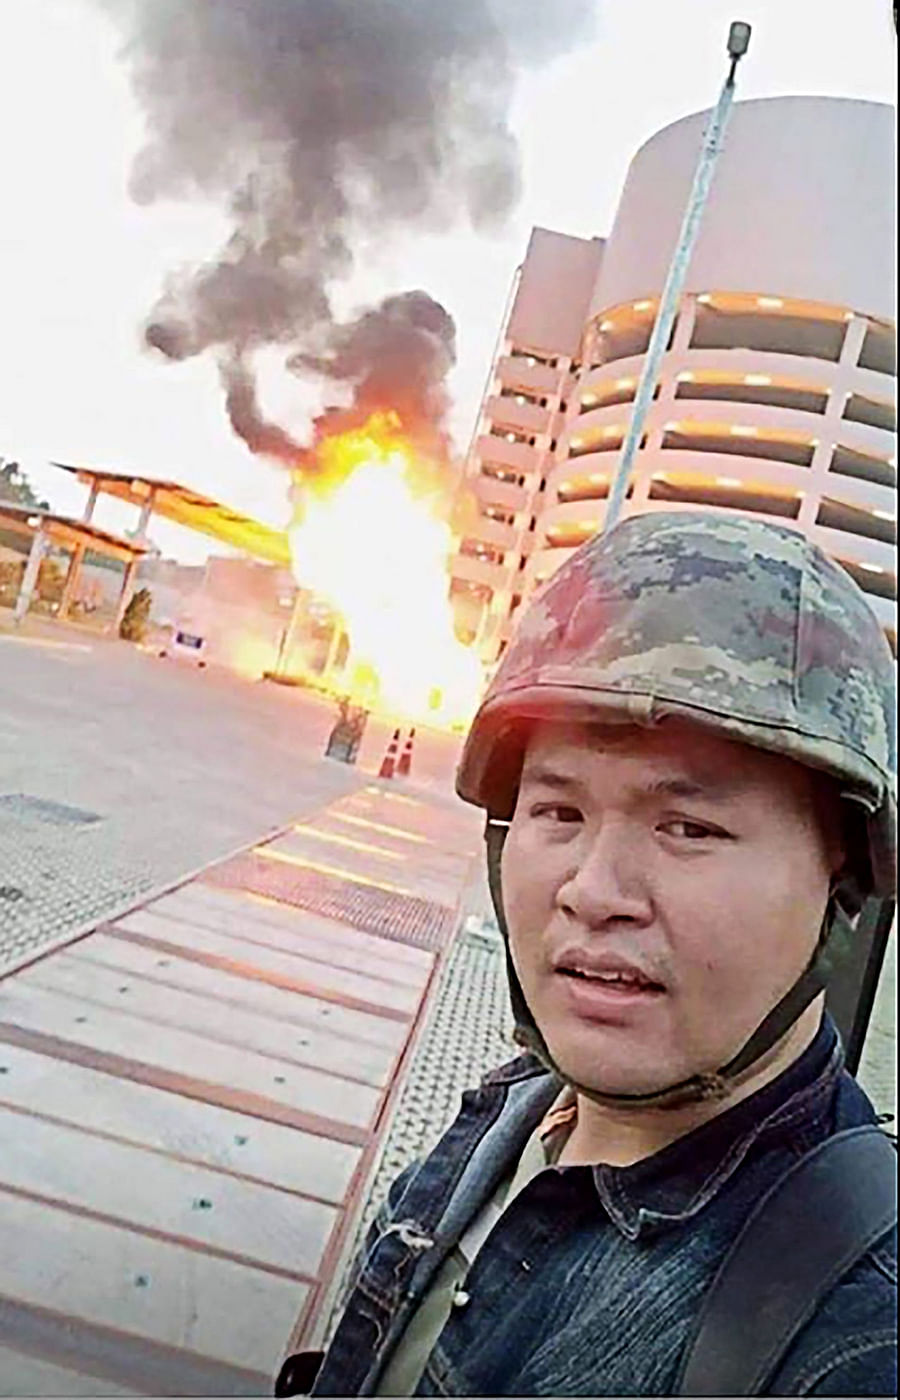 This screenshot made on February 8, 2020 from the Facebook livestream video of Thai soldier Jakrapanth Thomma shows him standing in front of a building on fire during an attack in the northeastern city of Nakhon Ratchasima on 8 February. Photo: AFP